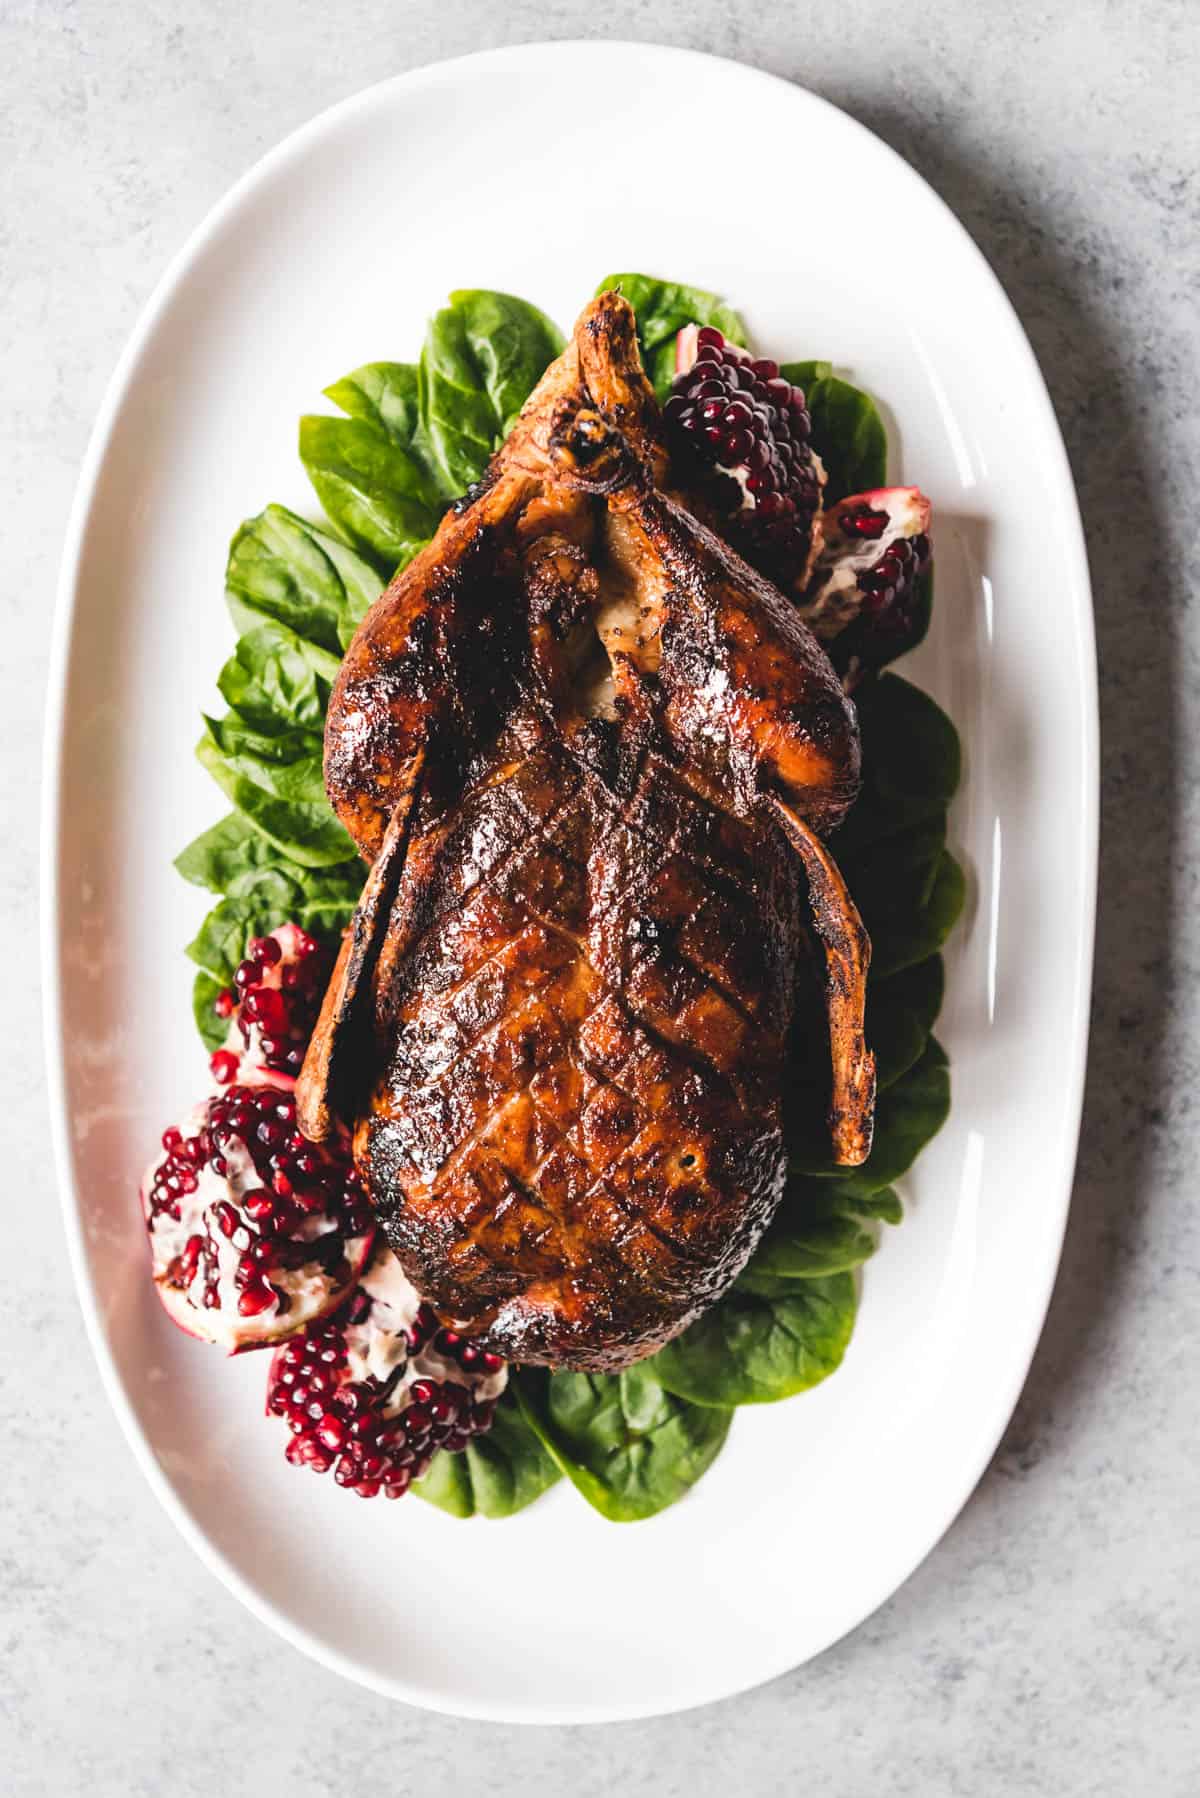 An image of a honey roasted duck served whole on a platter.